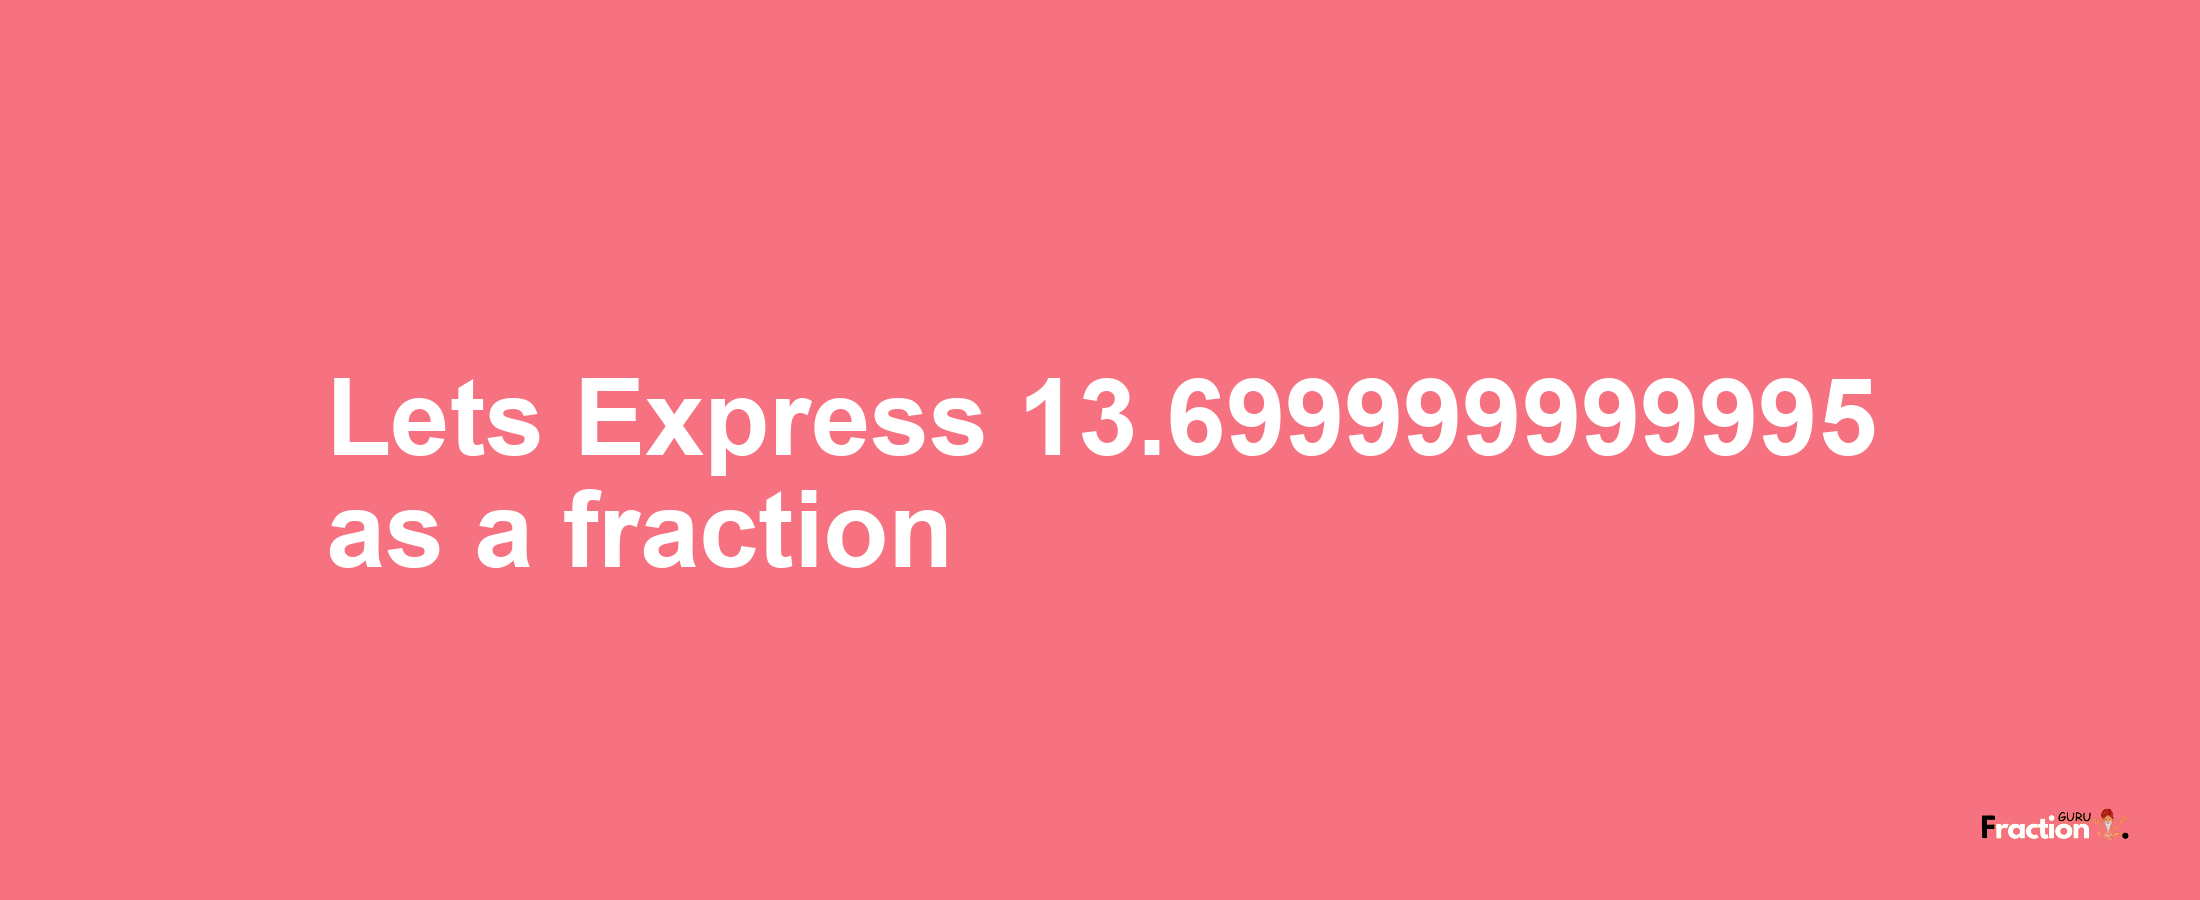 Lets Express 13.699999999995 as afraction